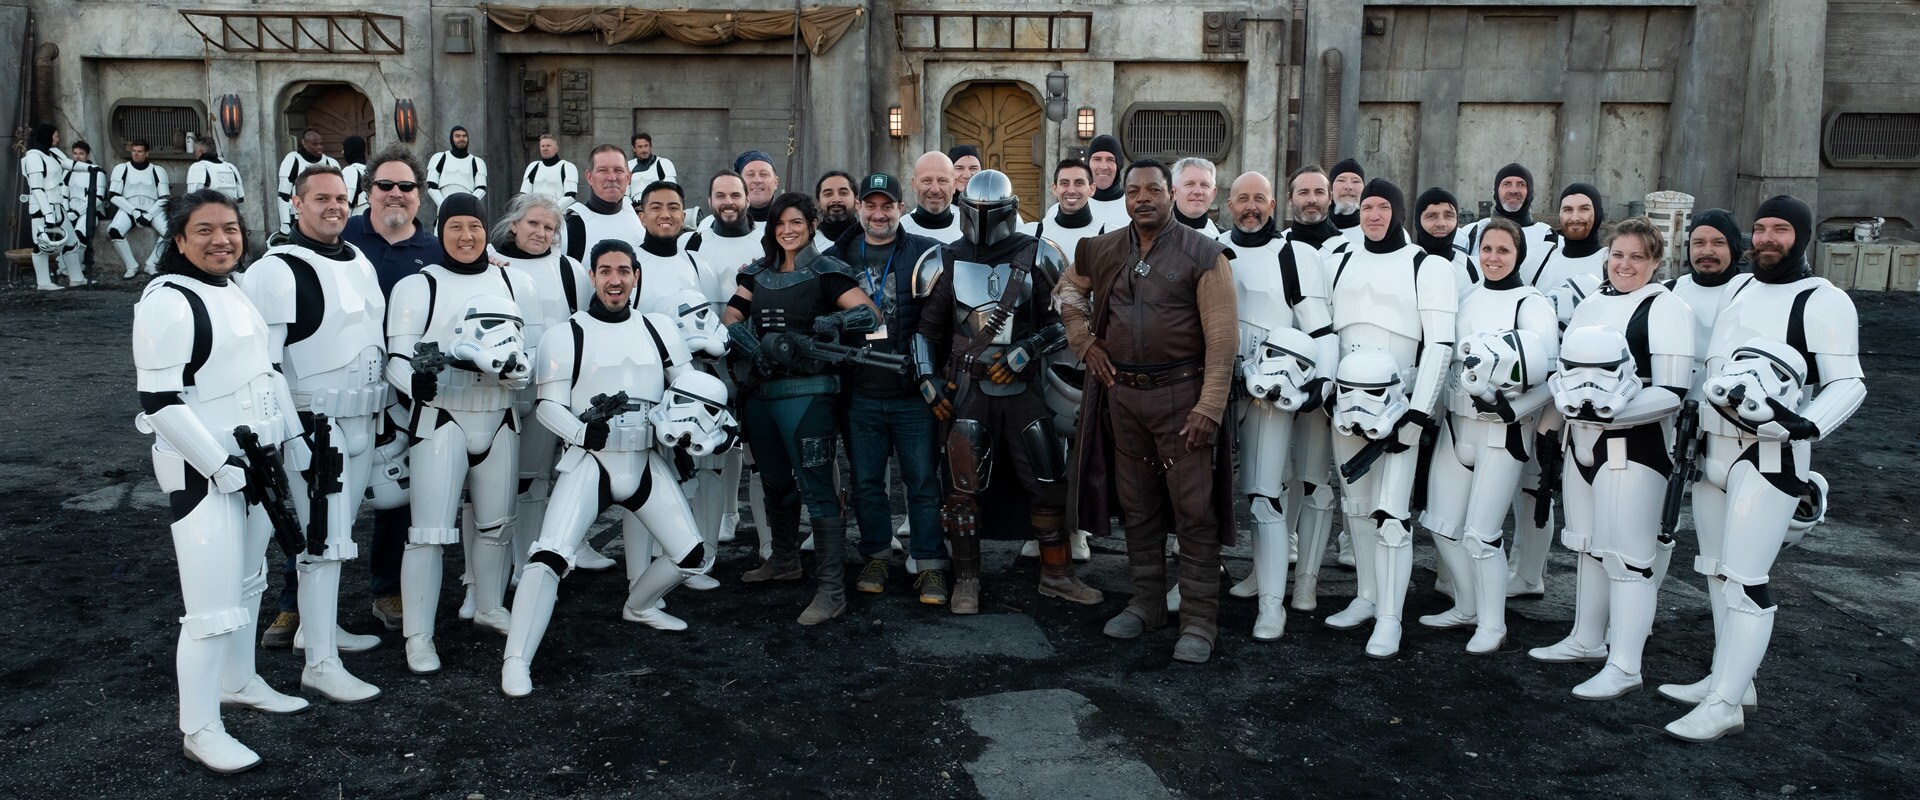 Local Los Angeles-based members of the 501st Legion fan costuming group were recruited by The Man...